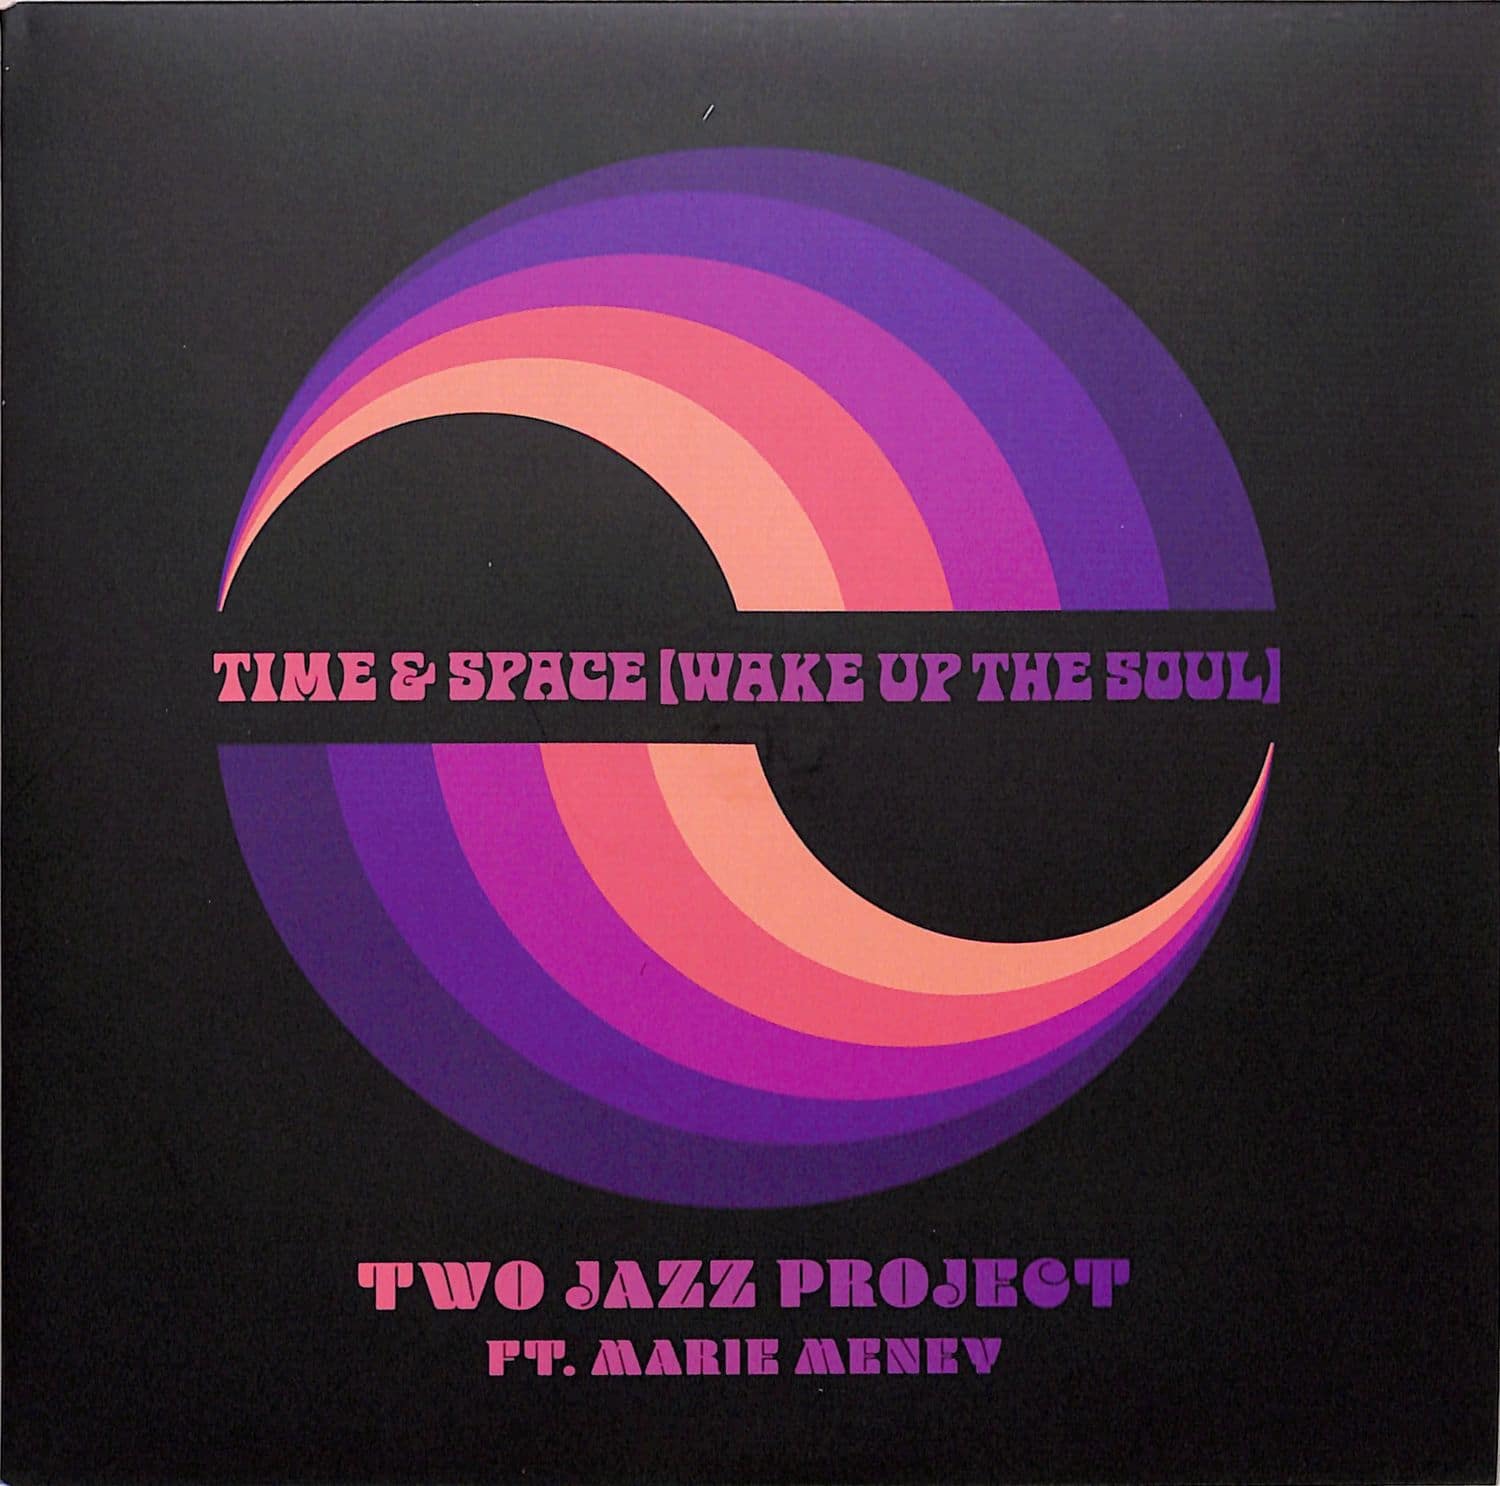 Two Jazz Project ft. Marie Meney - TIME & SPACE 